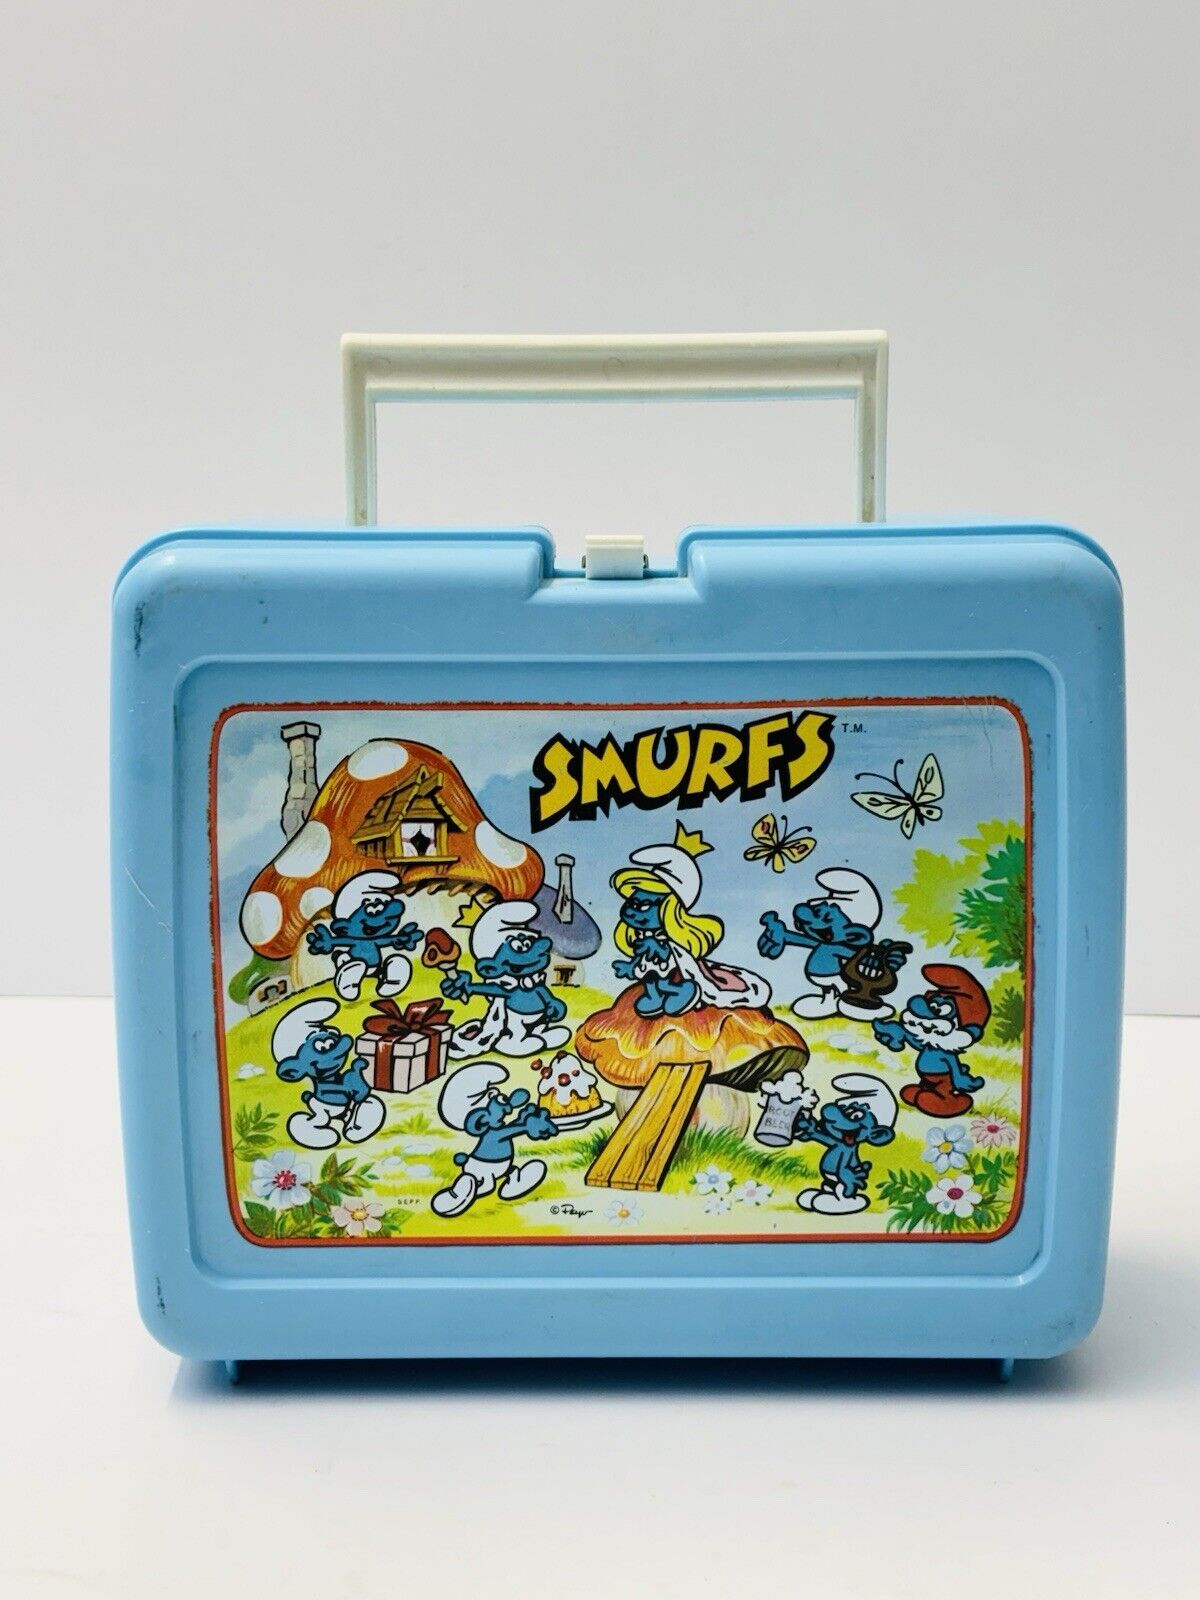 Vintage 1980s Smurfs Thermos Lunchbox School Lunch Box Plastic No Thermos